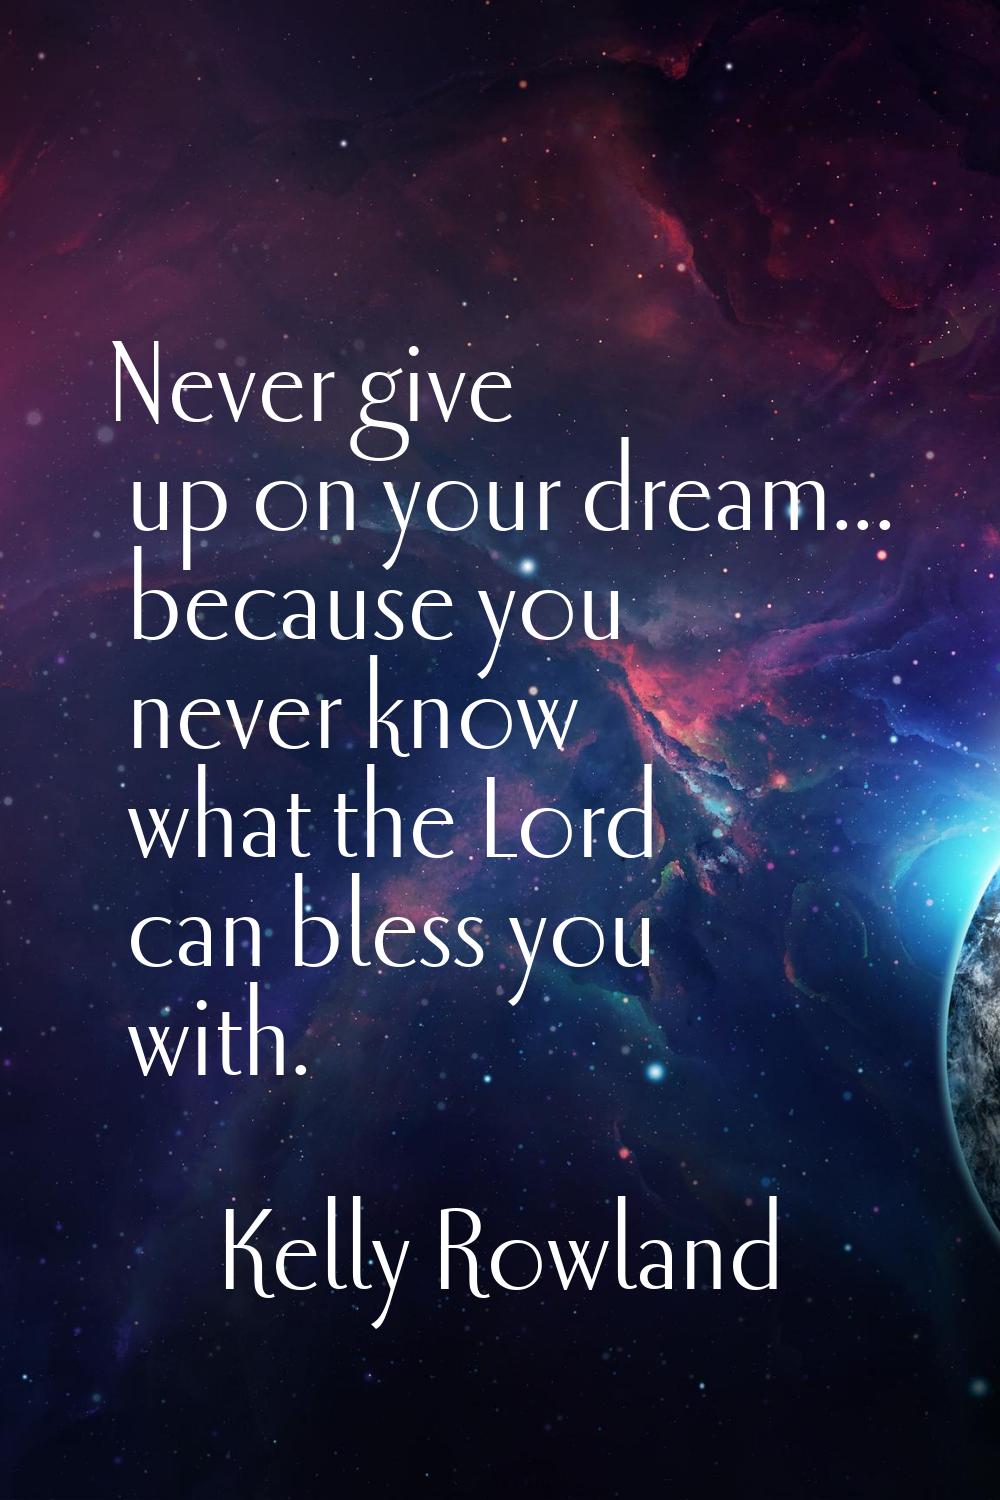 Never give up on your dream... because you never know what the Lord can bless you with.